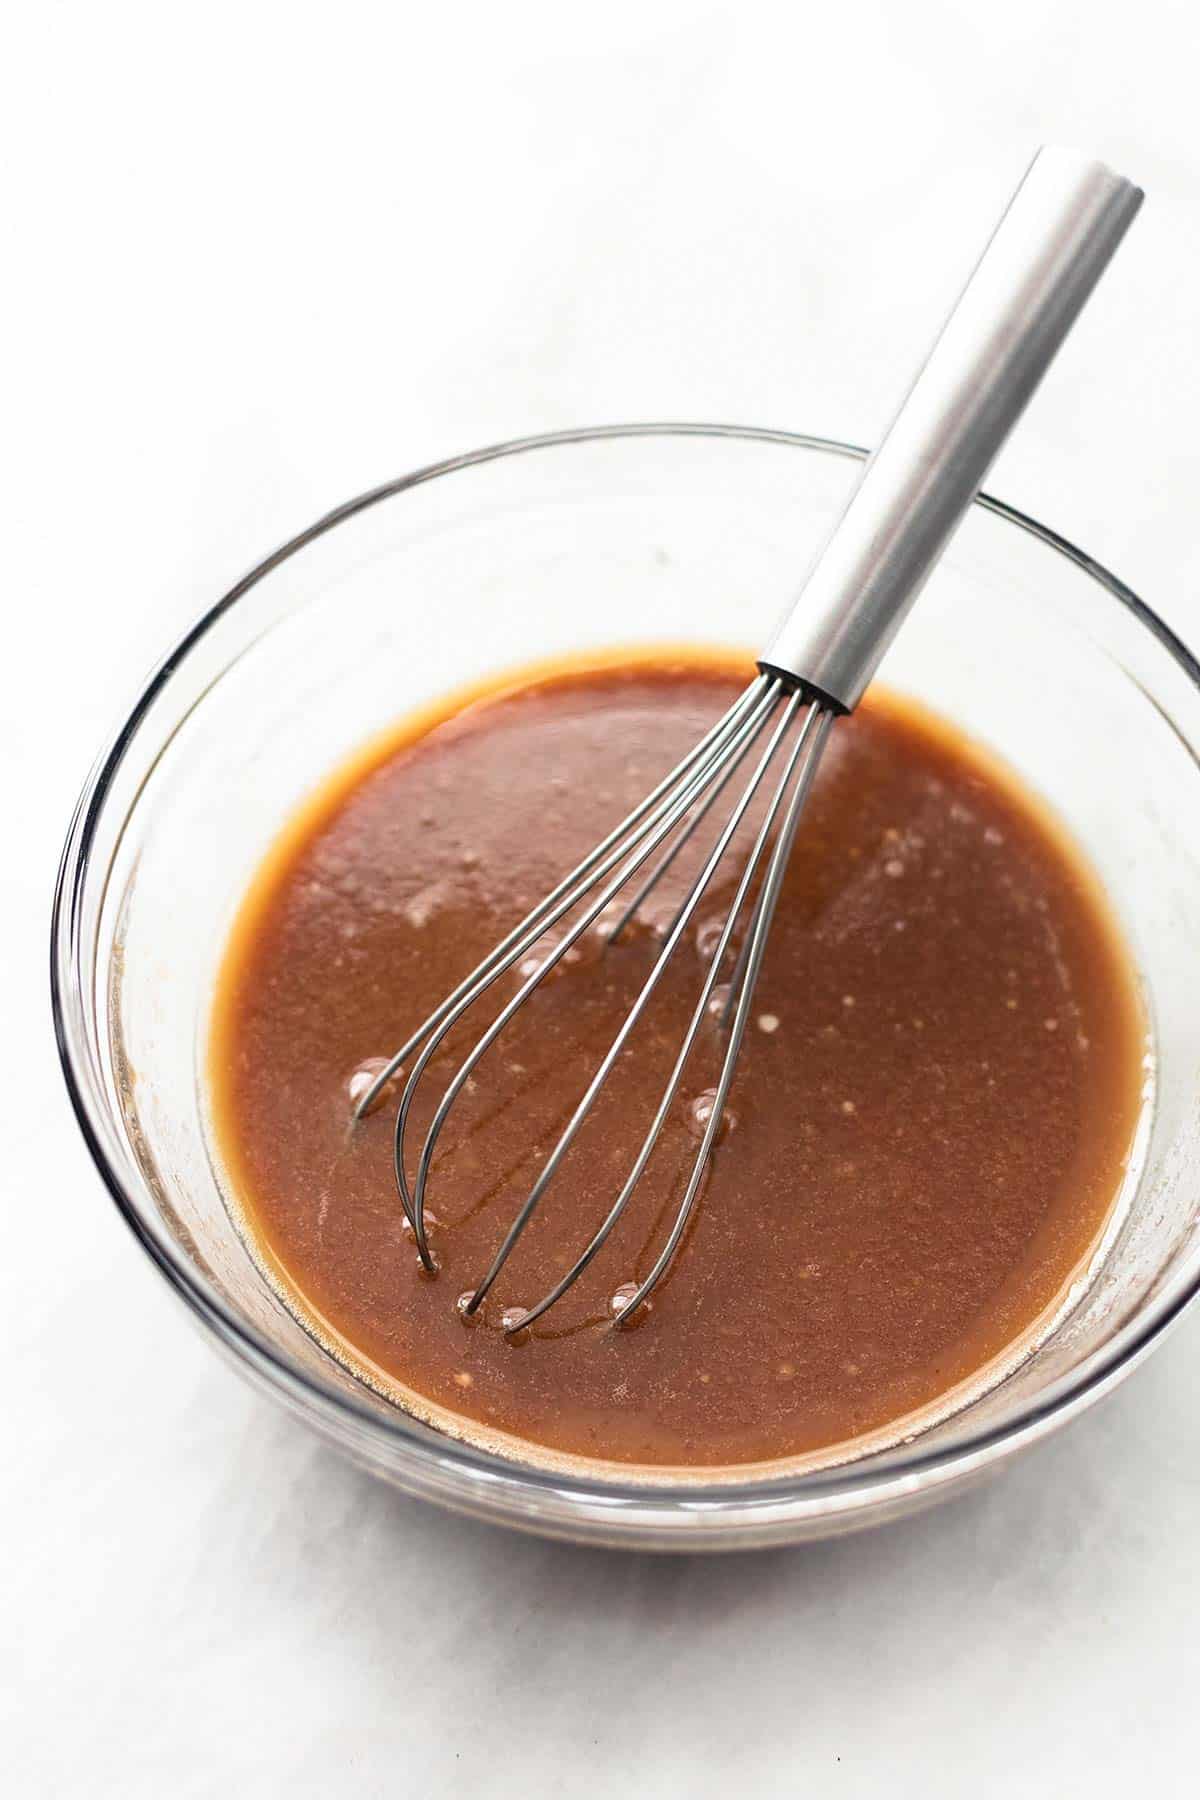 brown sauce and a whisk in a glass bowl.